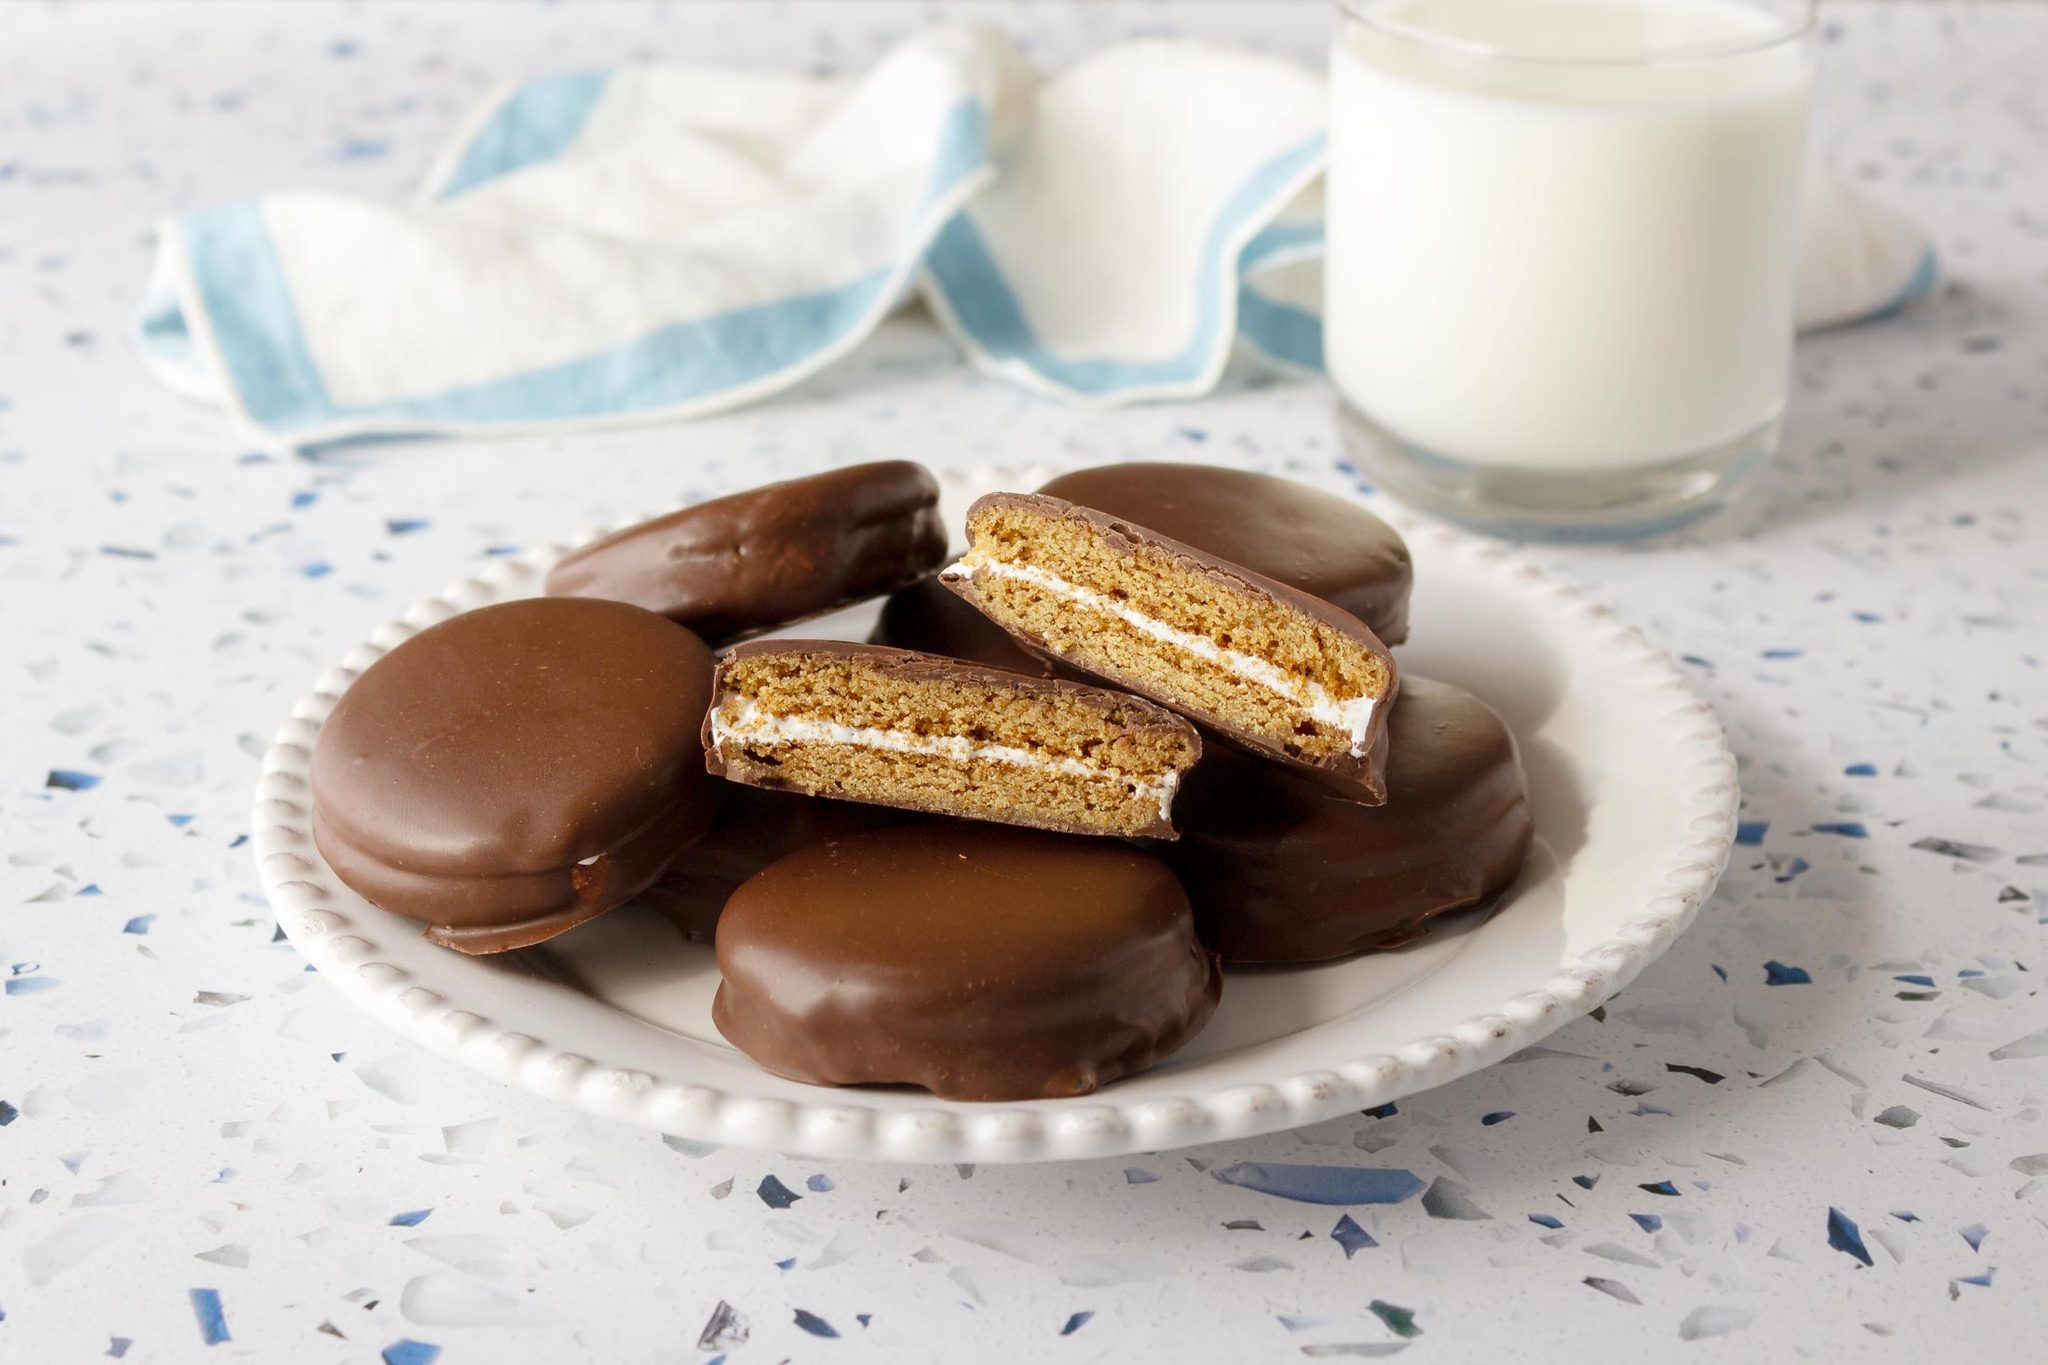 Moon Pie Recipe: How to Make This Tennessee Treat from Scratch